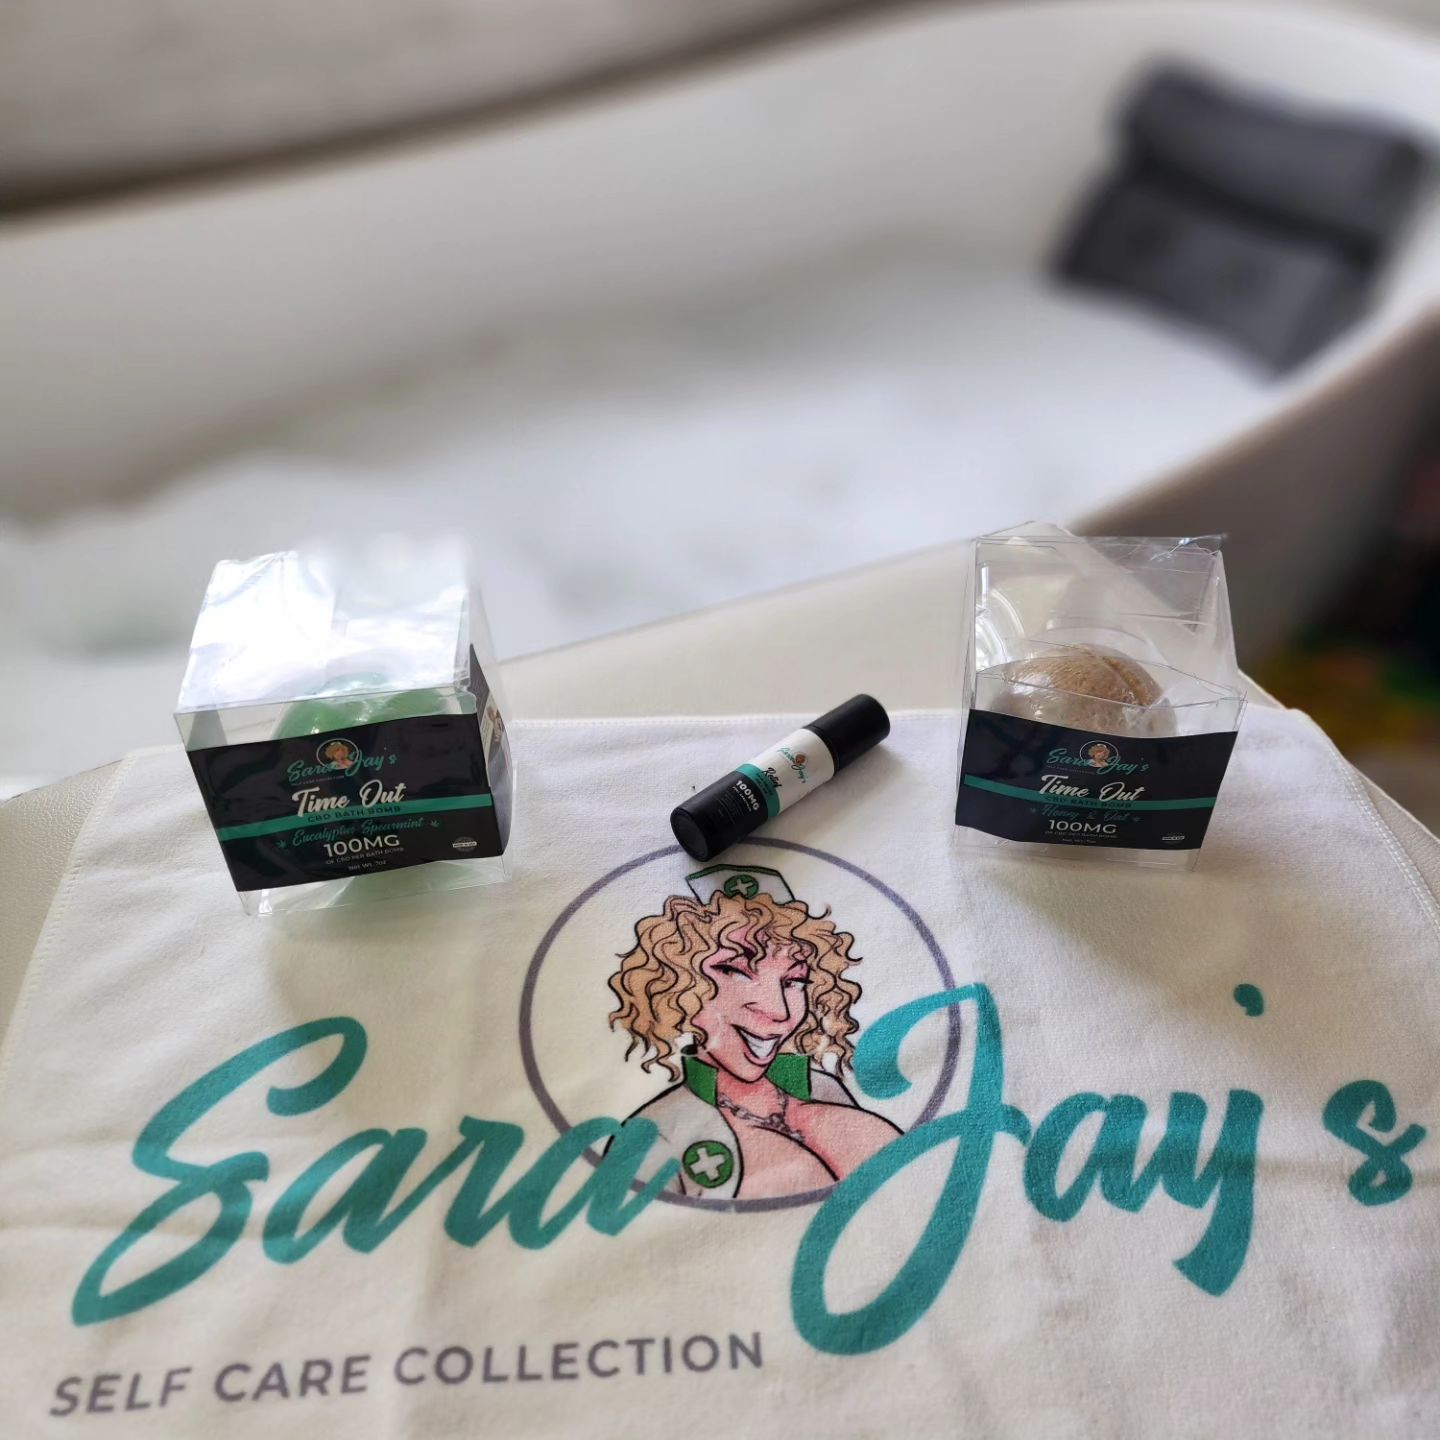 🛁💦 Ready to unwind? Dive into pure relaxation with @sarajaycbd "Time Out" Bath Bomb! My go-to soothing scent is Honey Oat & Eucalyptus Spearmint! 🍯🌾 Treat yourself with self-care like never before! Use code holly15 for 15% off your order today!! Sarajaycbd.com for long days and even longer nights! #sarajaycbd #cbdsj #selfcare